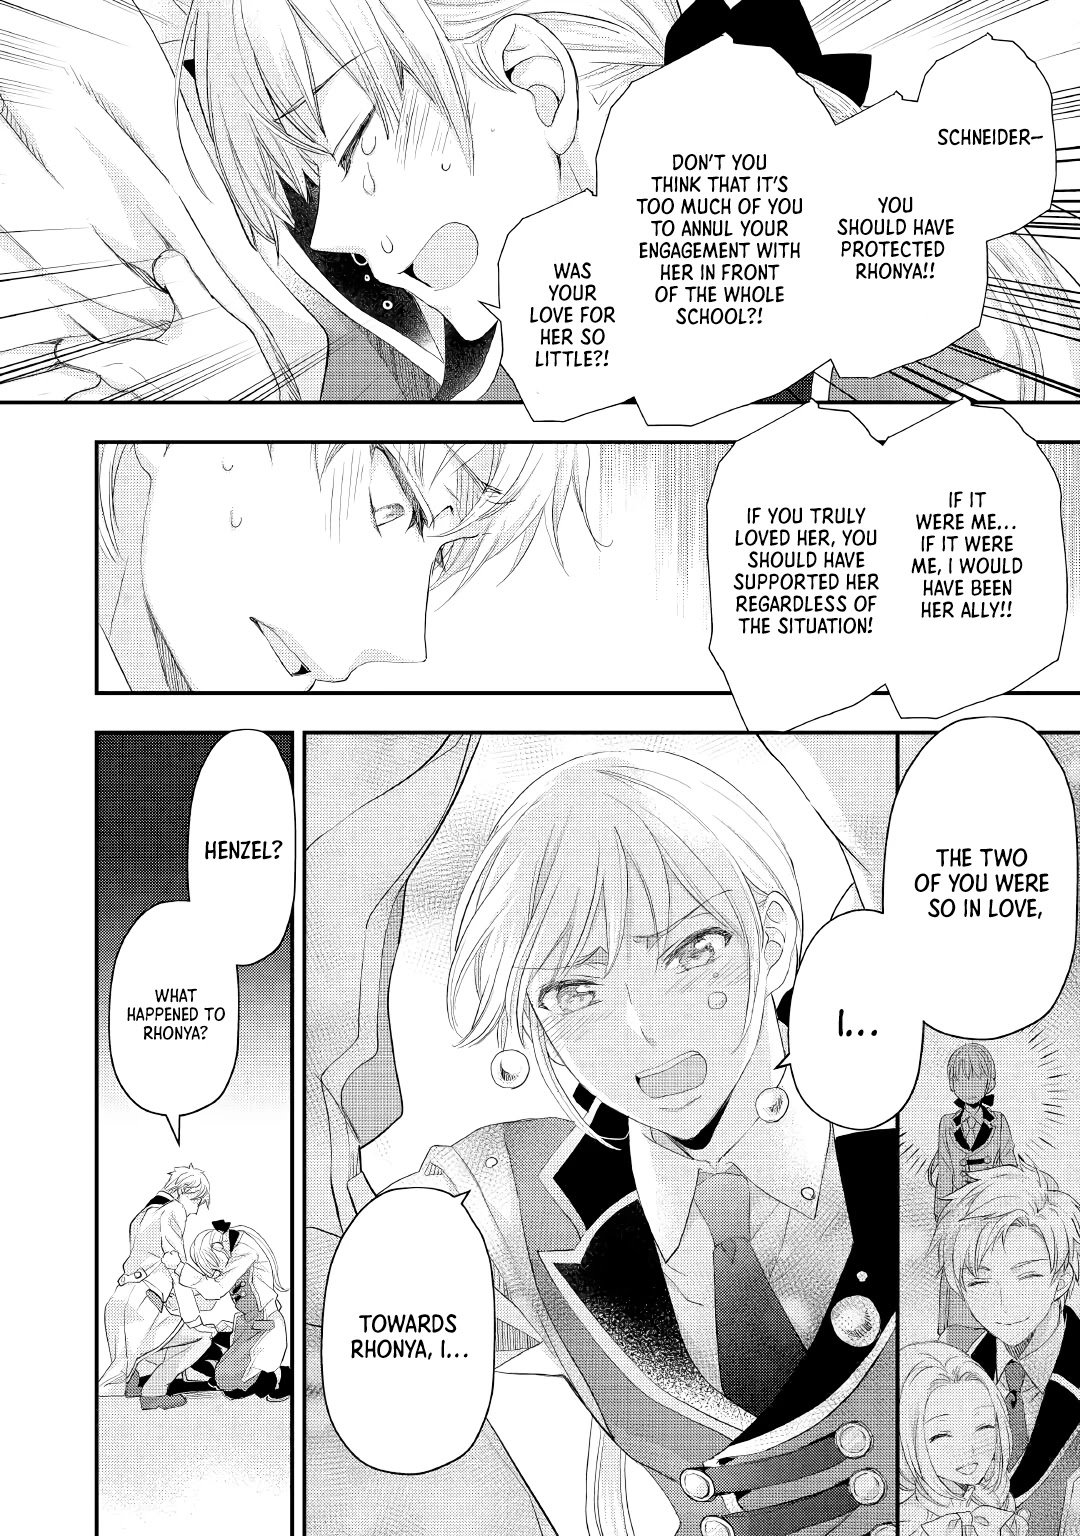 Milady Just Wants to Relax - chapter 18 - #3